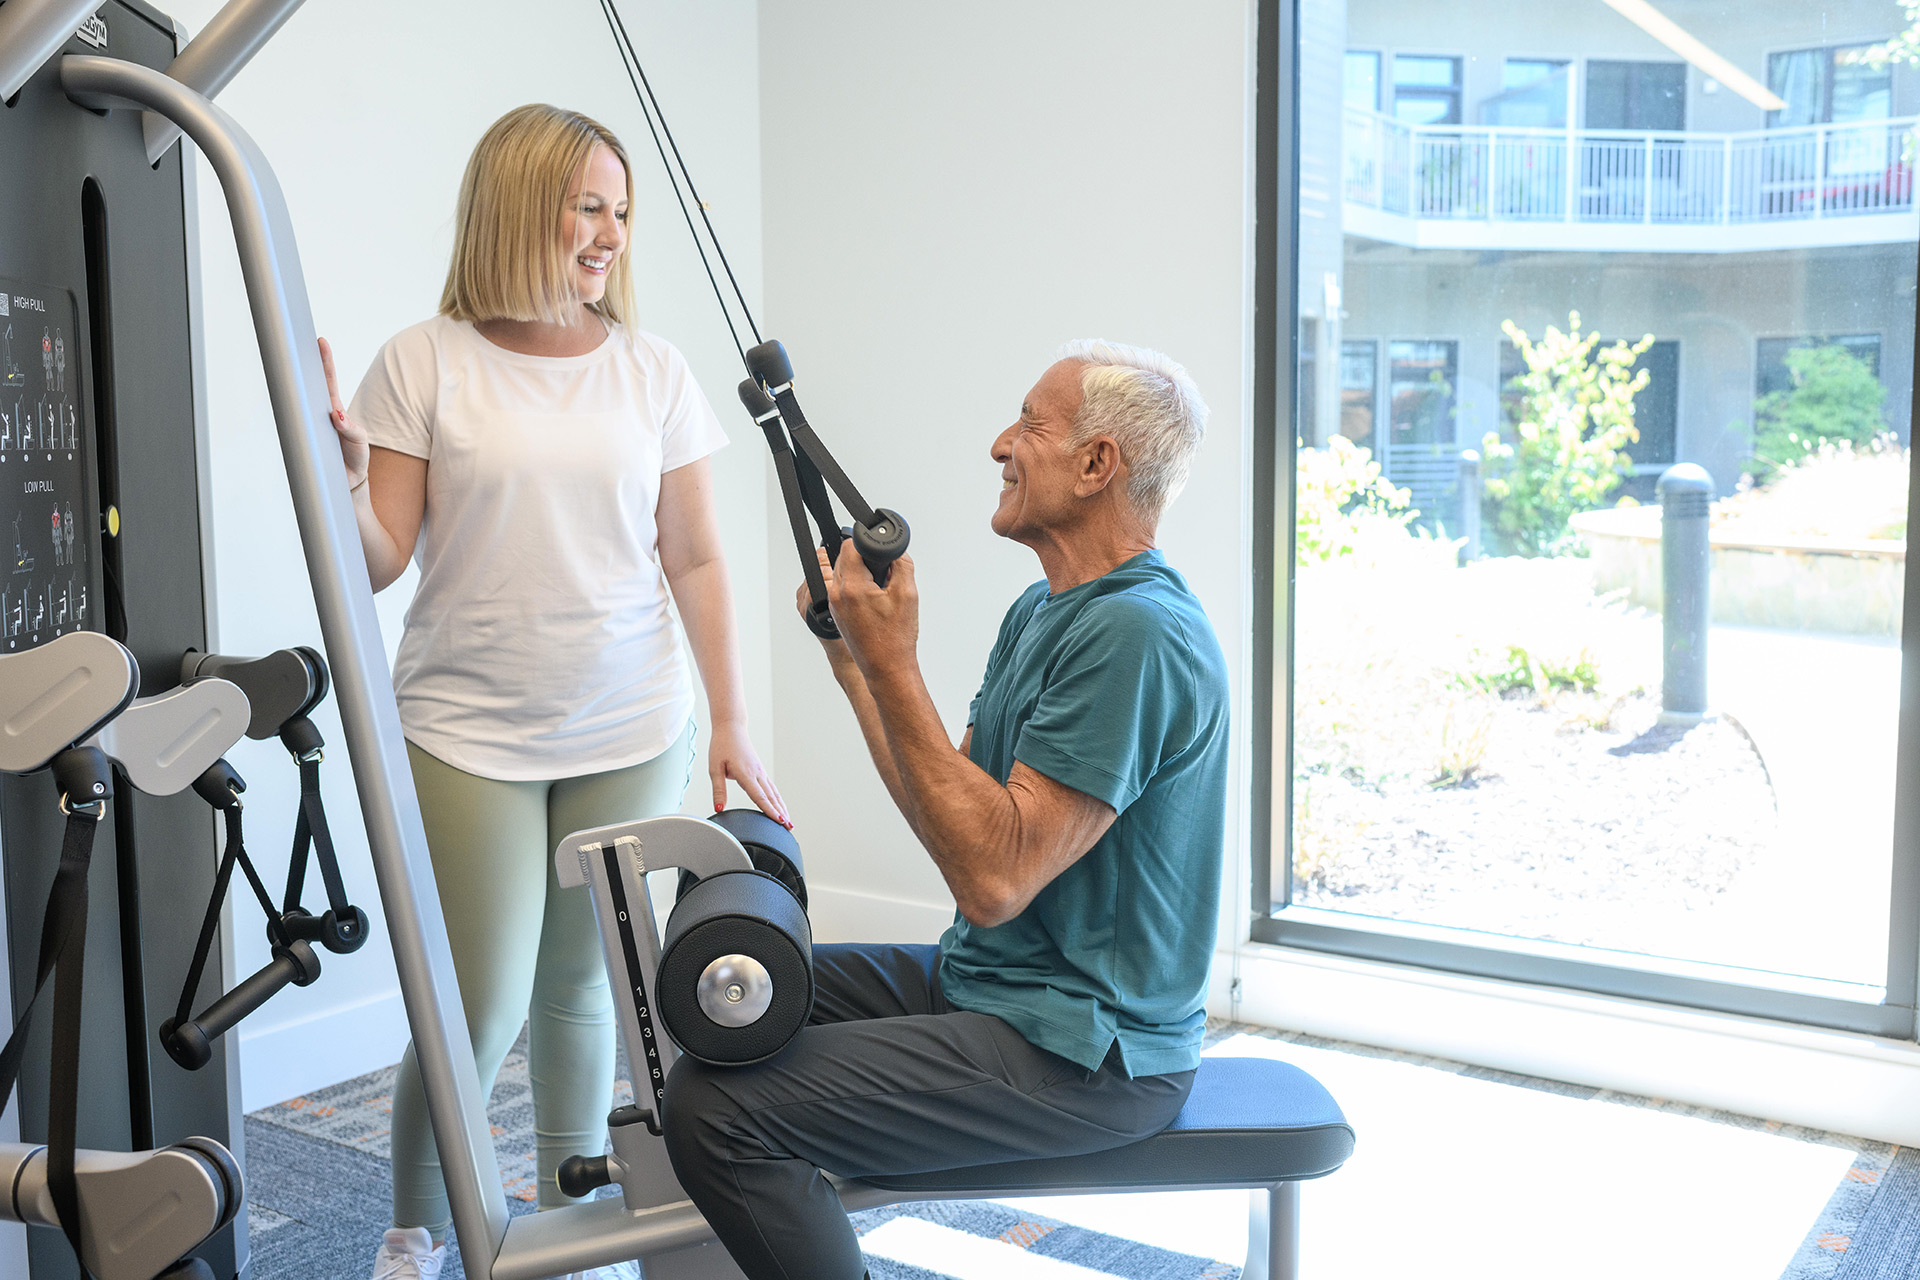 A resident is using the fitness machine in the fitness center.